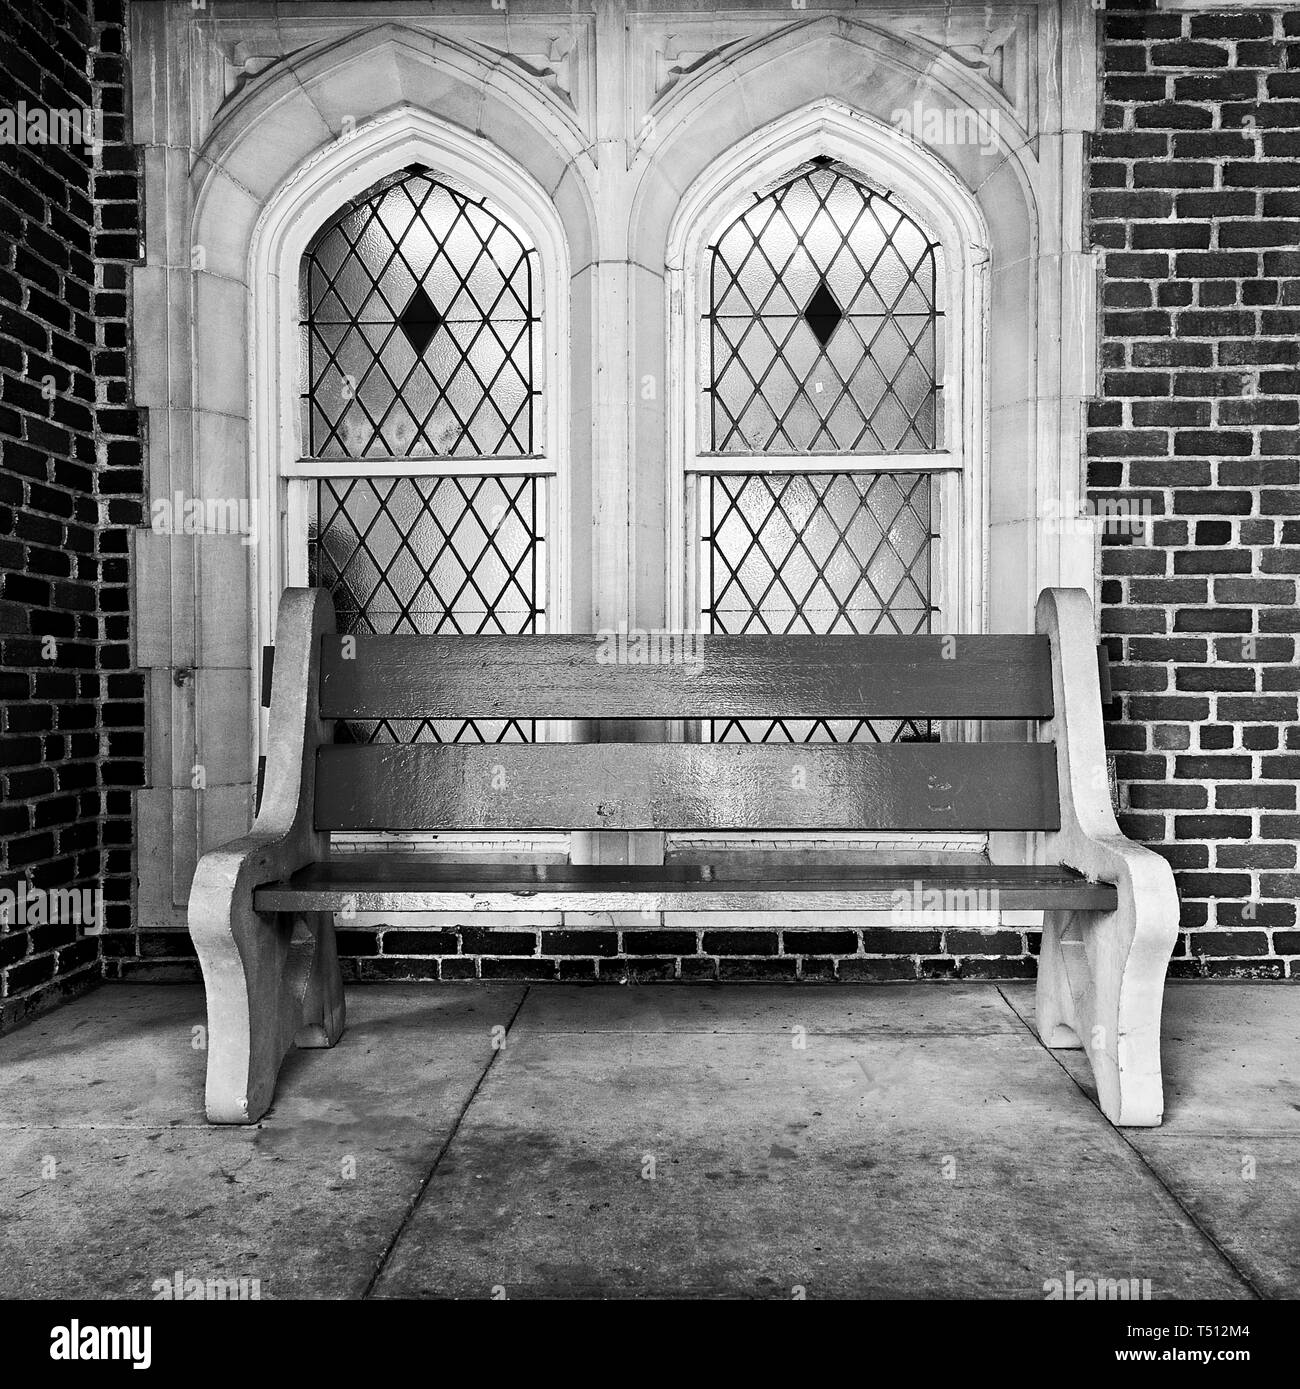 New Orleans, LA USA - 05/08/2018  -  Red Bench In Front of Stained Glass Windows at Loyola University in B&W Stock Photo